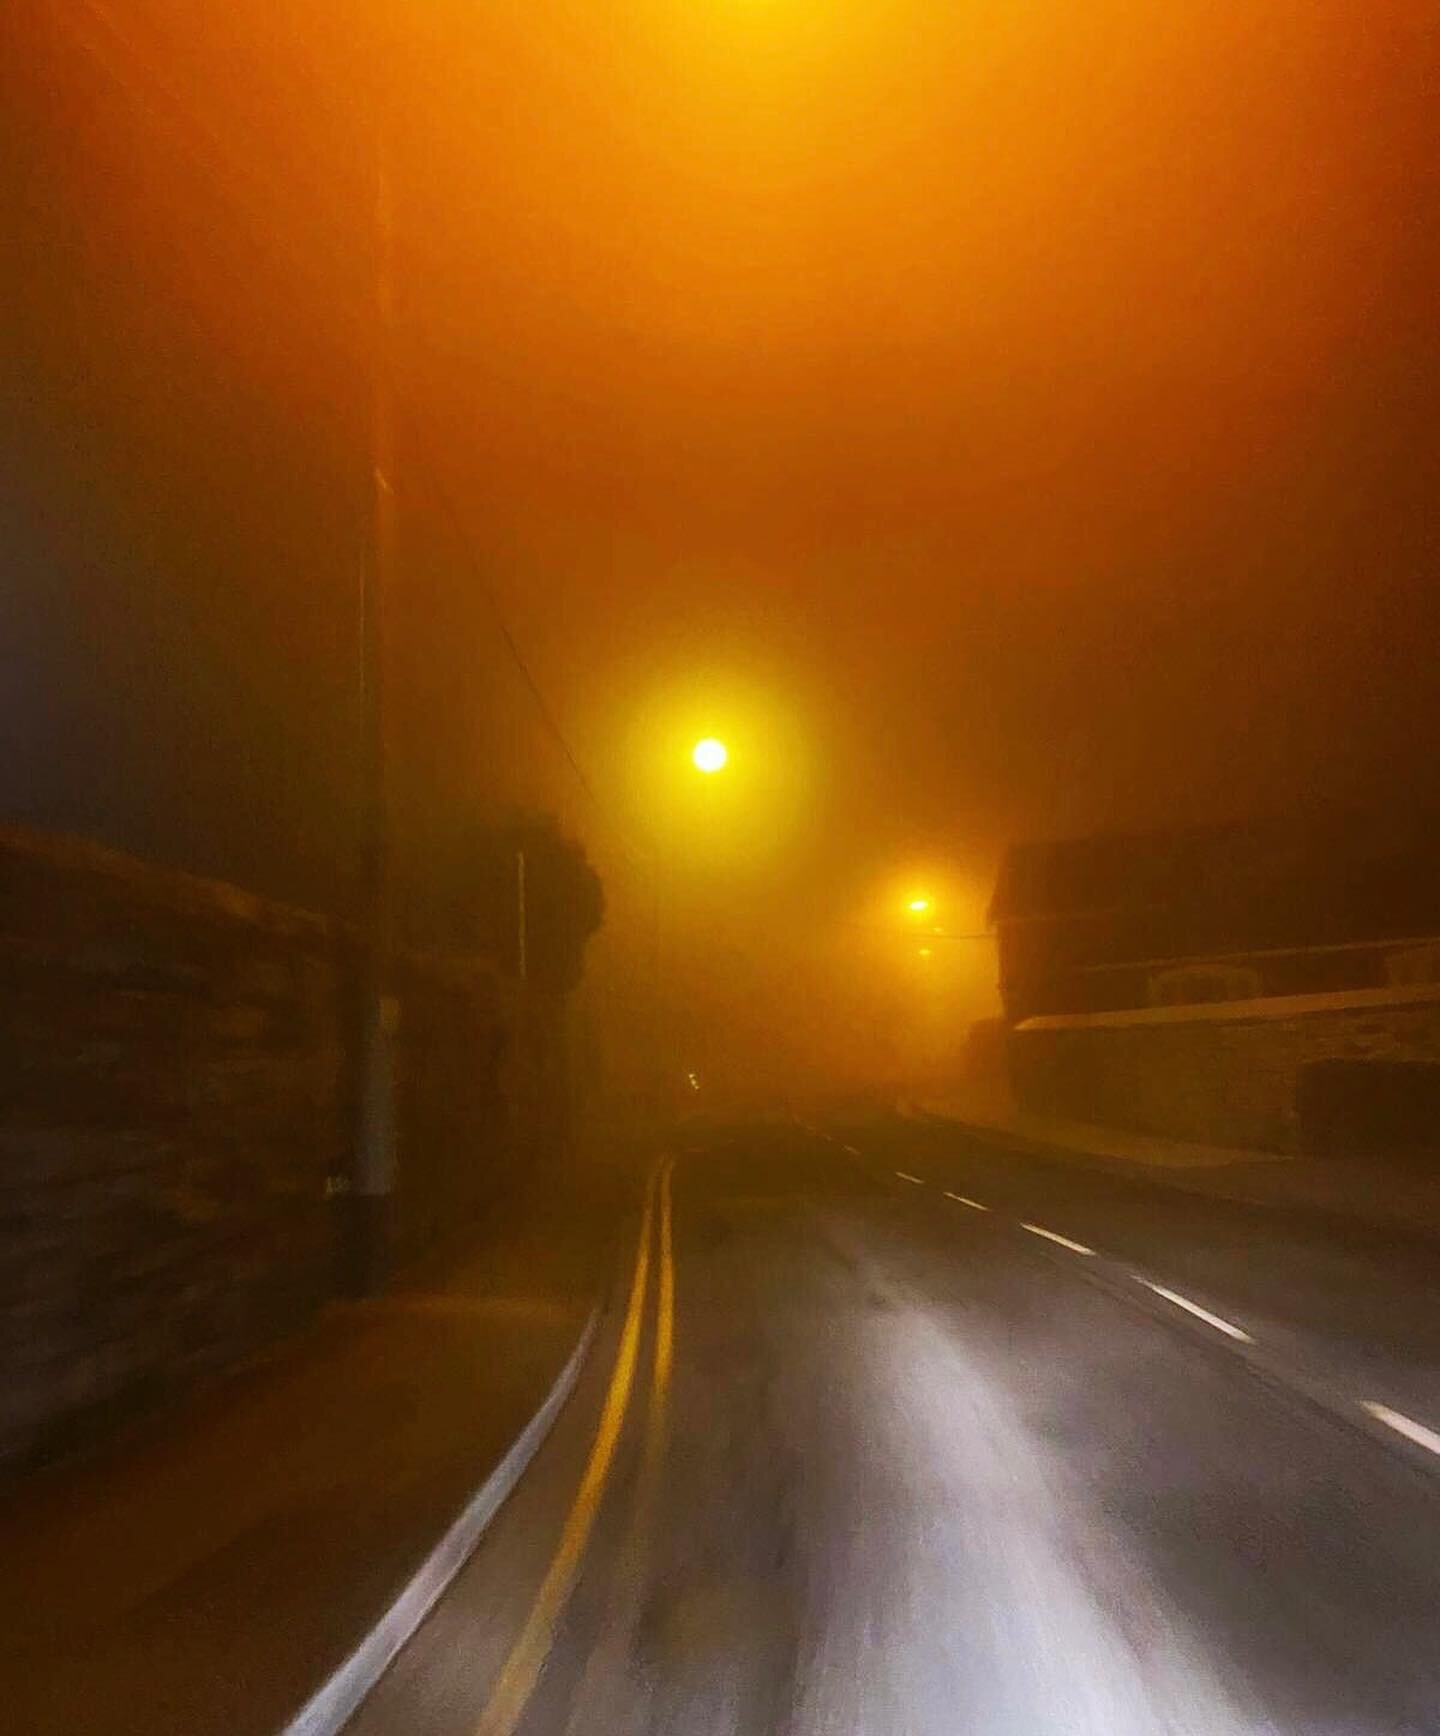 searching through a foggy mind. #corkcity #nightscapes #foggylights #foggynights #inmotion #noplacelikehome